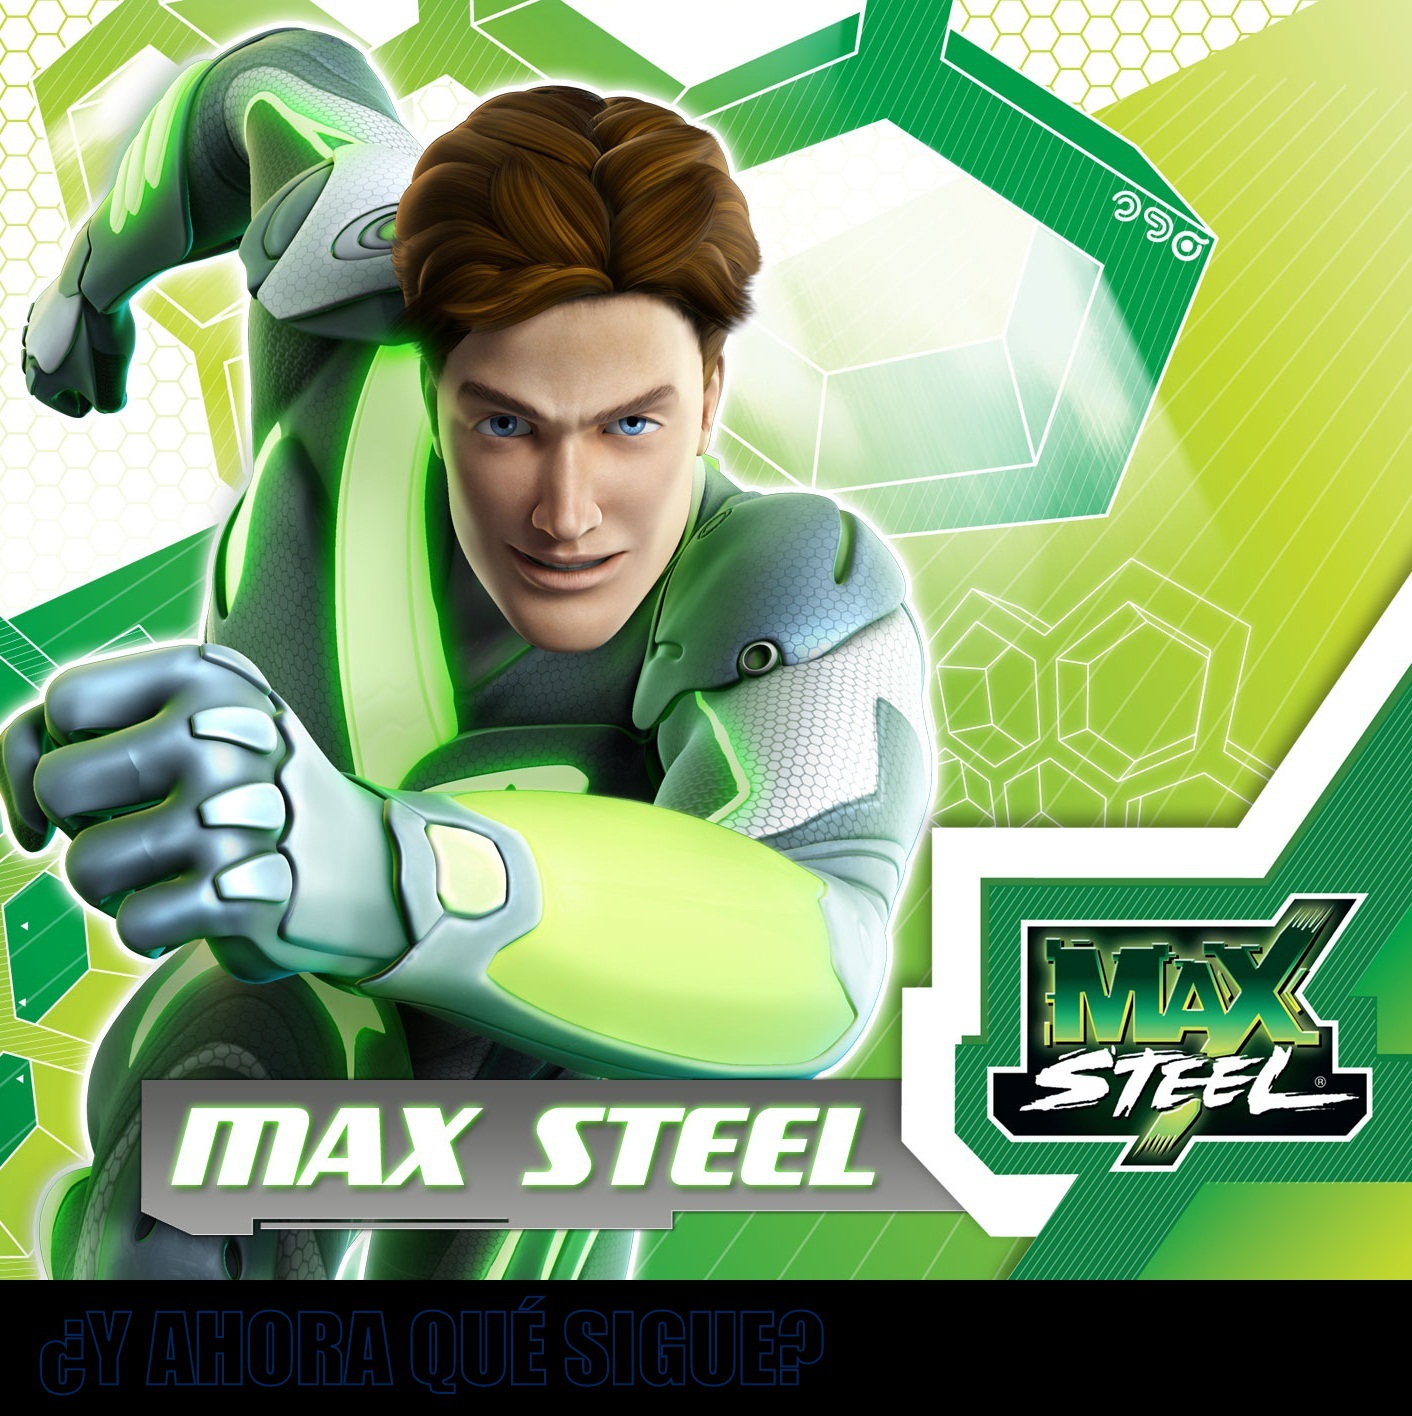 Max Steele wallpapers and images - wallpapers, pictures, photos